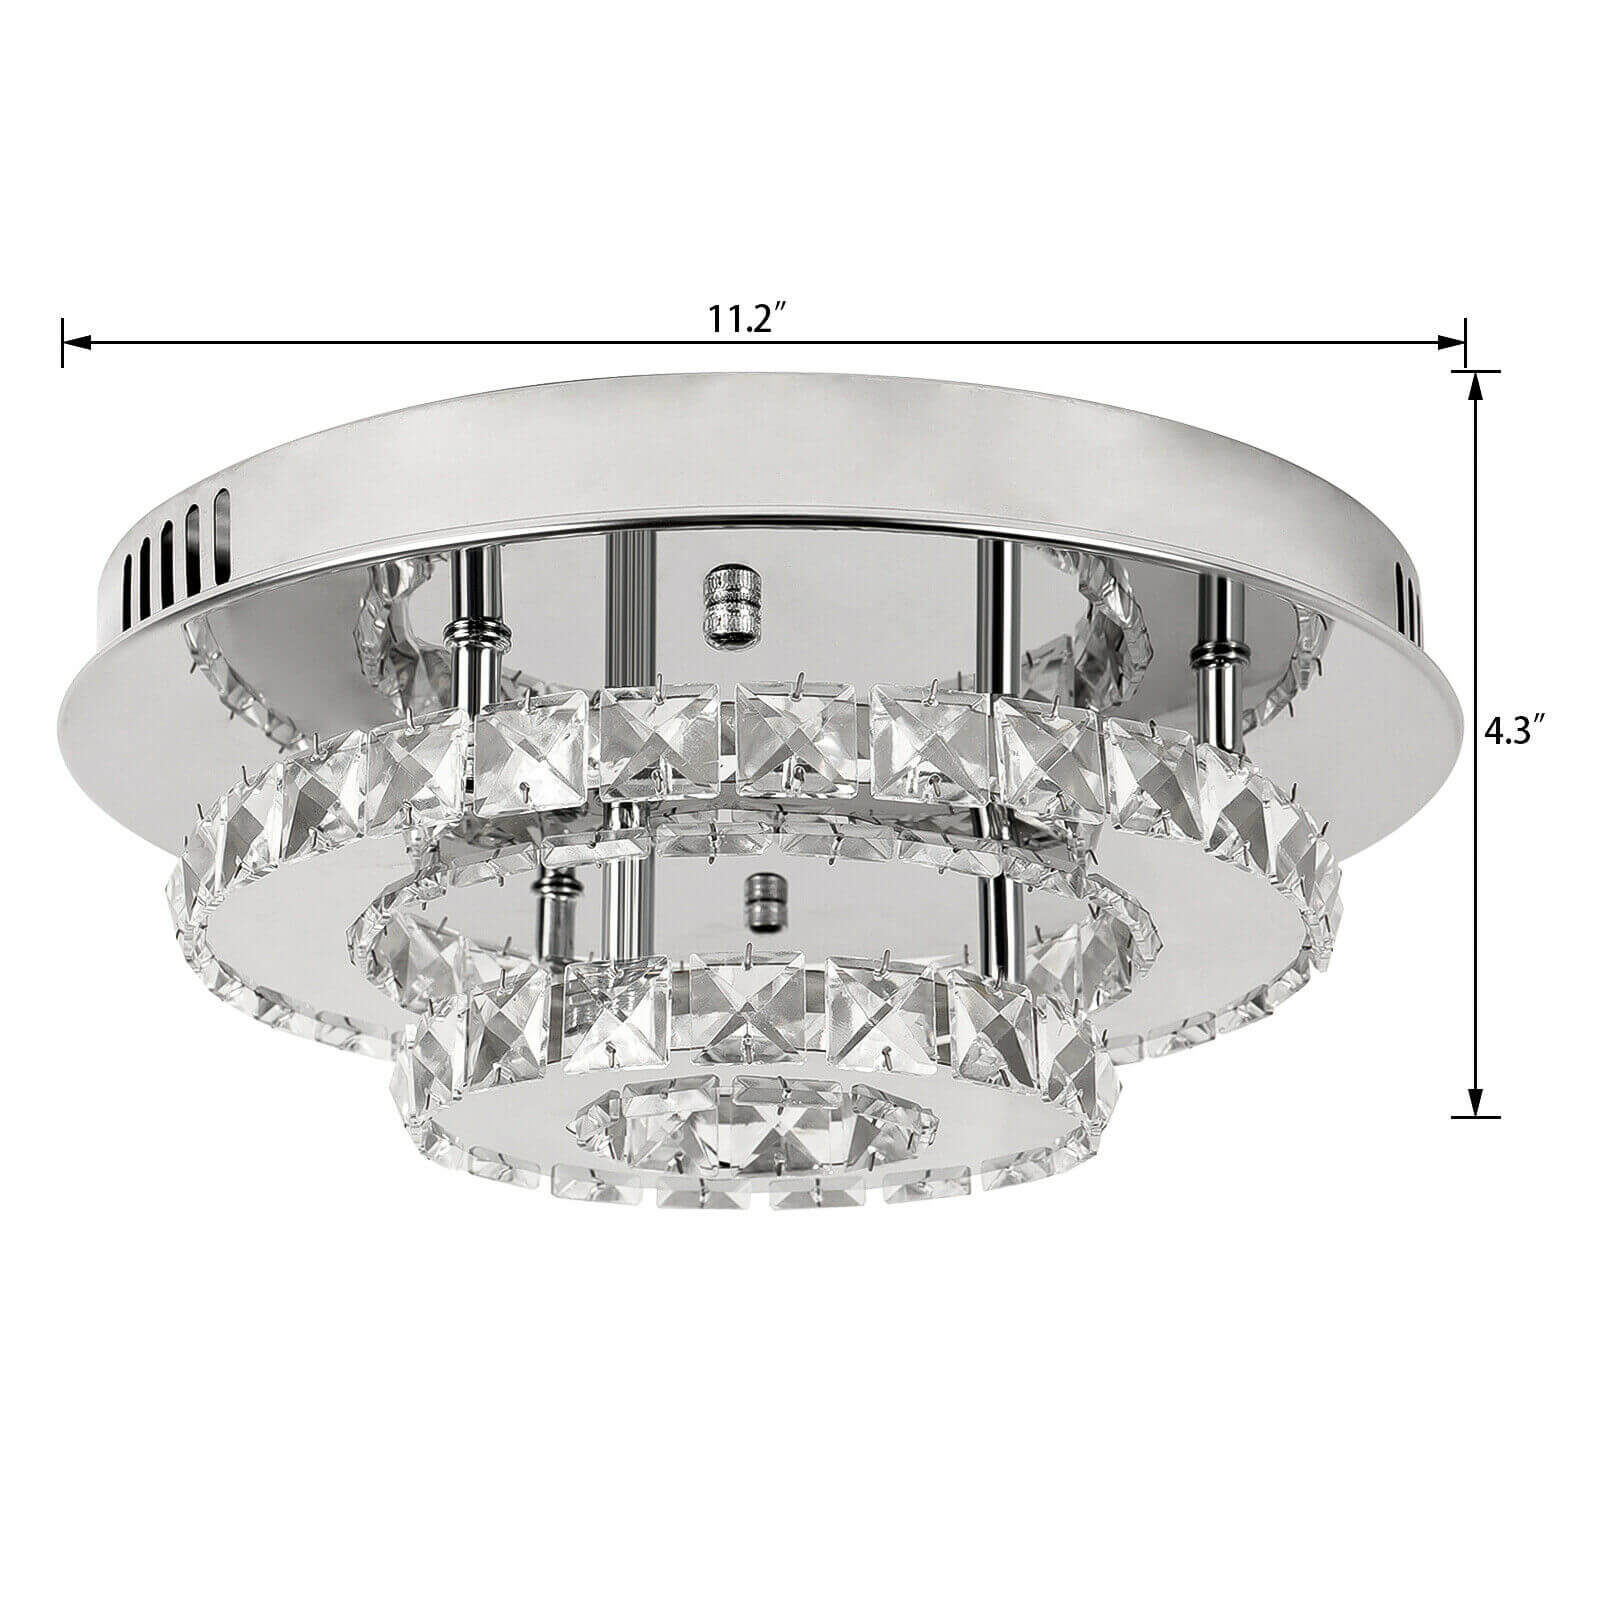 size of 2-Tier Luxury Crystal LED Ceiling Light